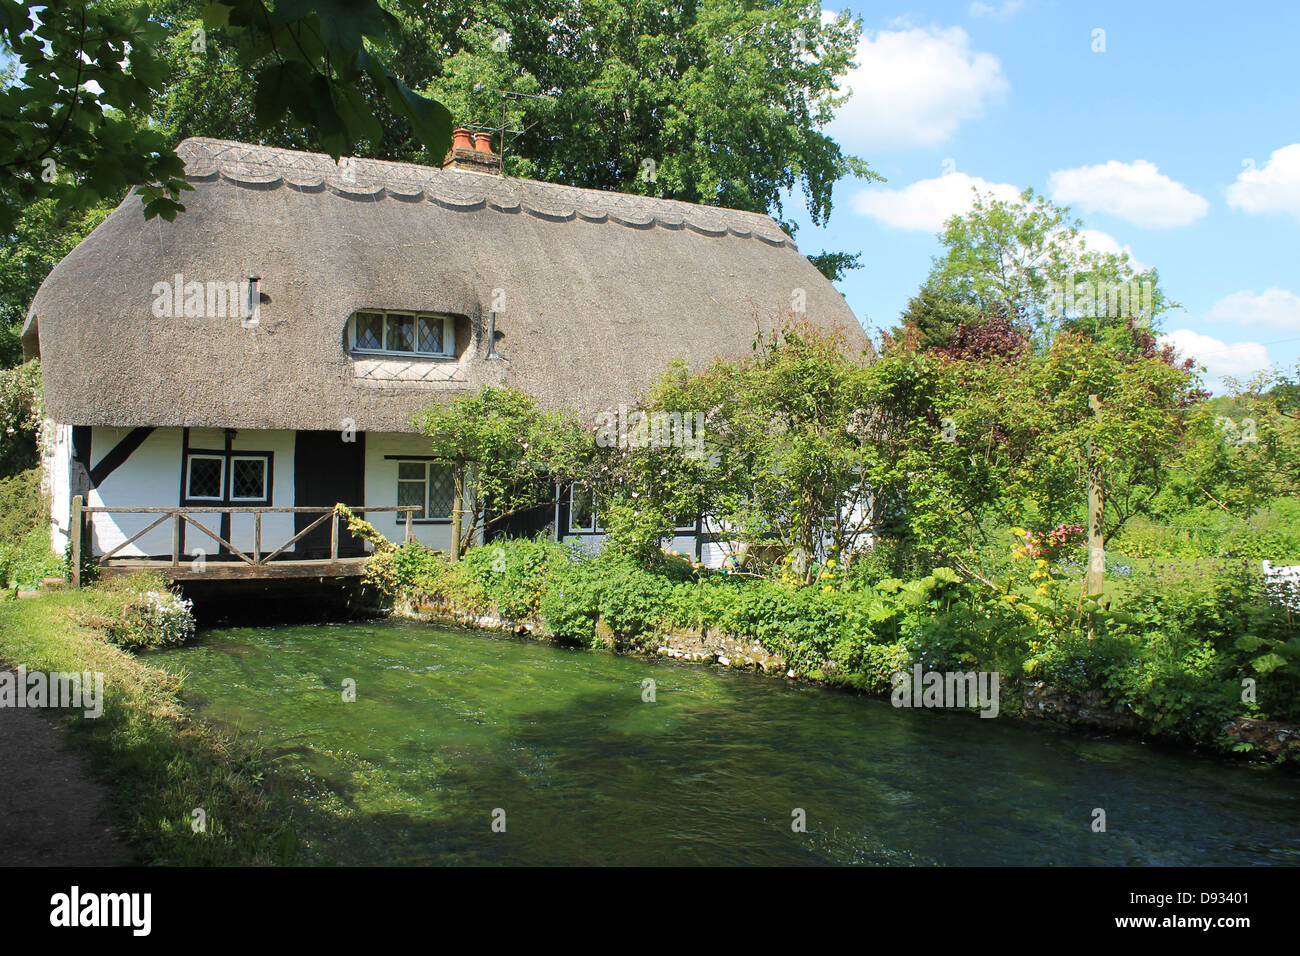 The Fulling Mill on the River Itchen near Alresford, Hampshire, UK Stock Photo